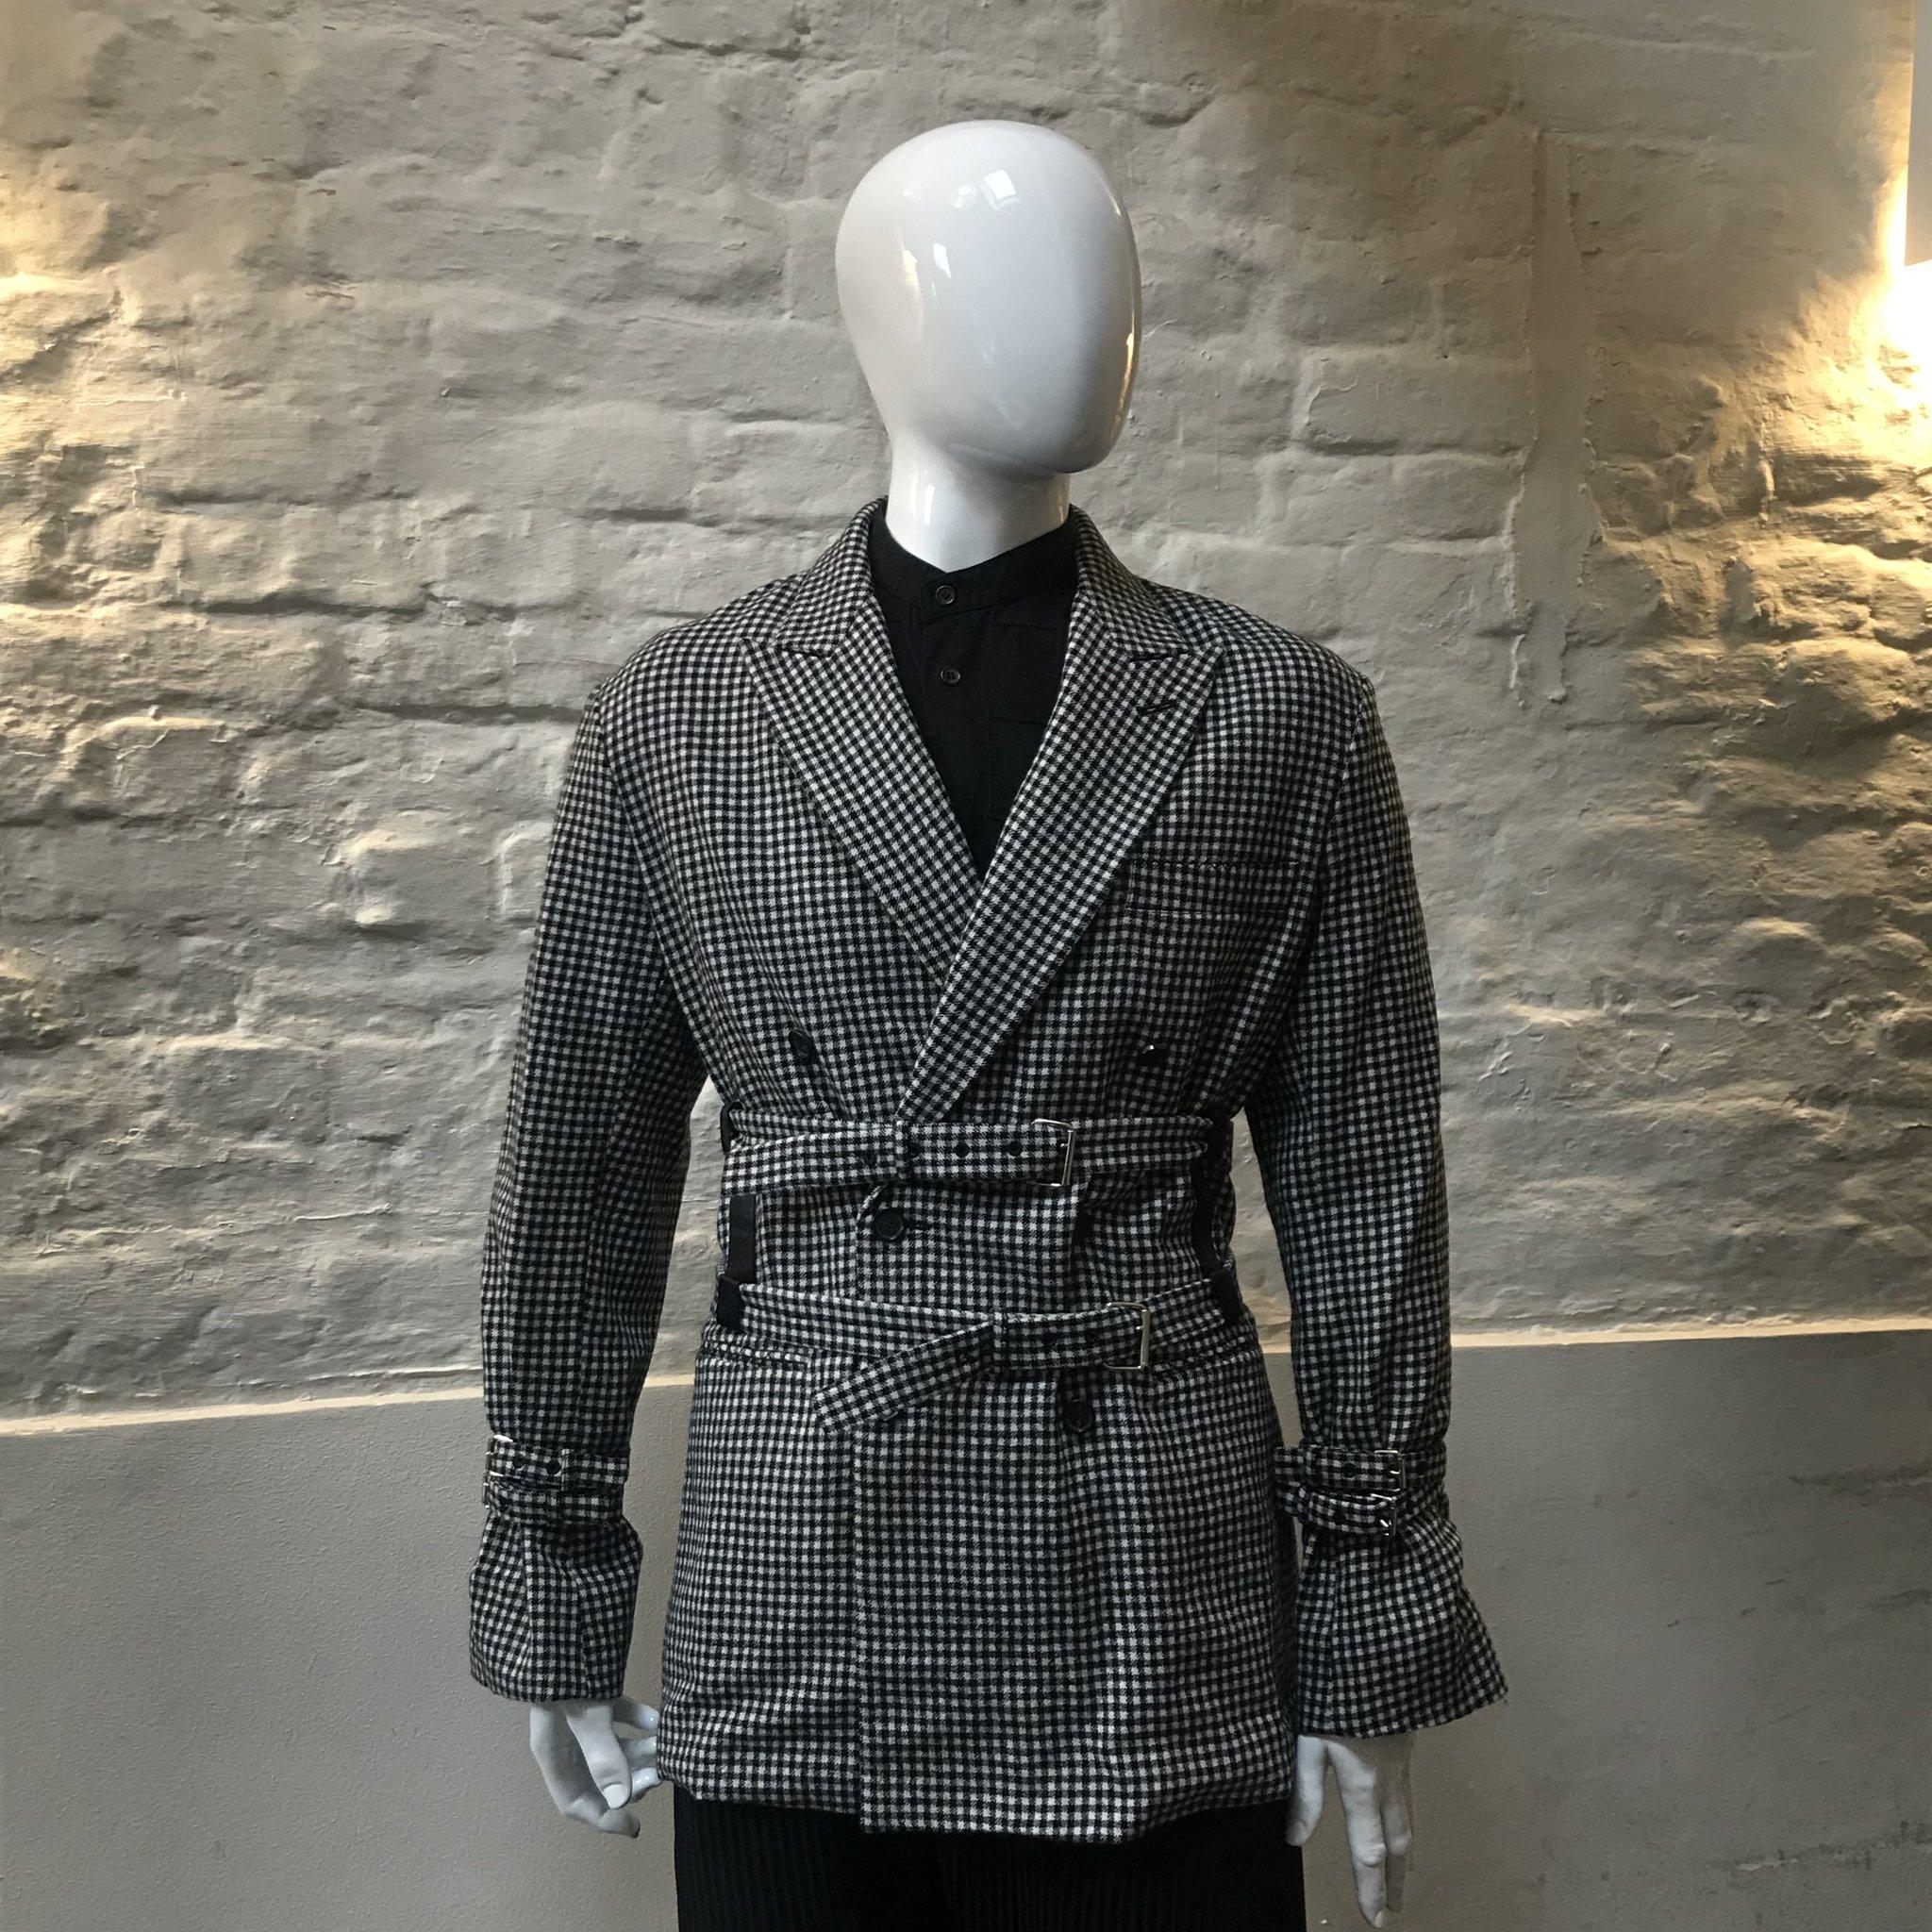 Preen by Thornton Bergazzi Dog Tooth Belt Jacket made in the UK from wool. 

Preen By Thornton Bregazzi was founded in 1996 by Justin Thornton and Thea Bregazzi, built on an aesthetic of darkly romantic and effortlessly modern, juxtaposing the